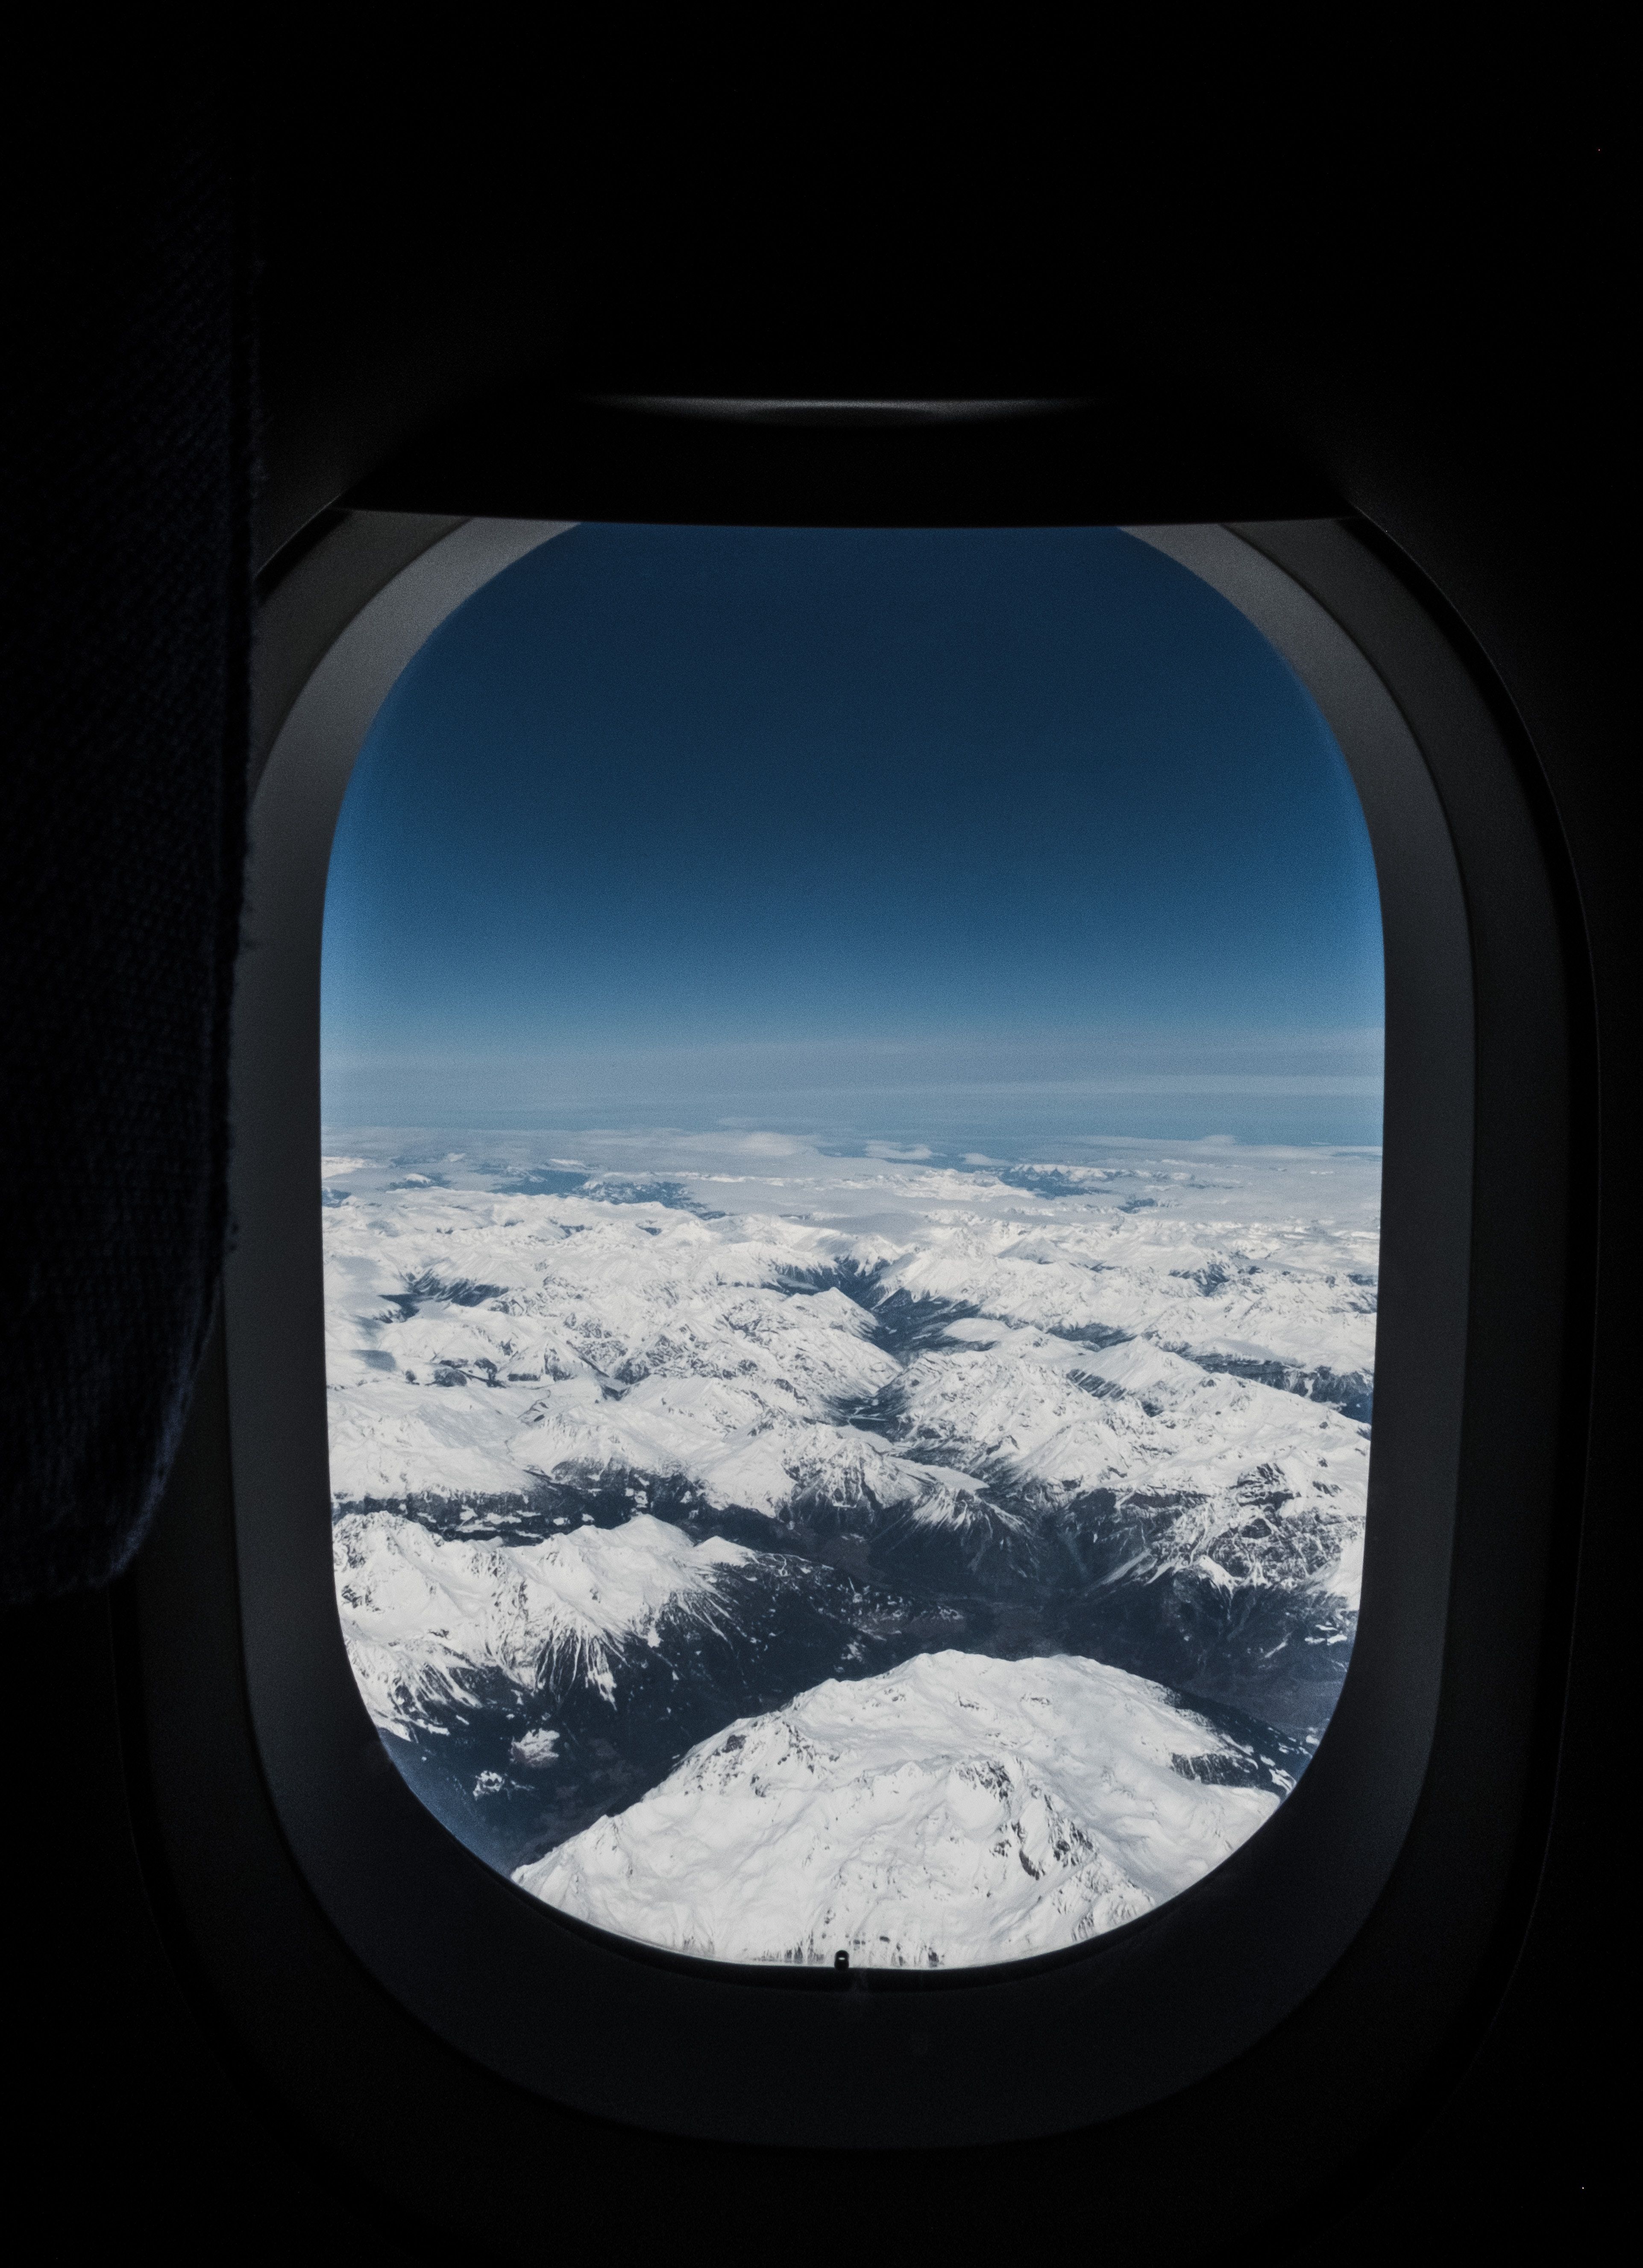 Download wallpaper 3846x5310 porthole, airplane window, mountains, aerial view, flight, sky, peaks HD background